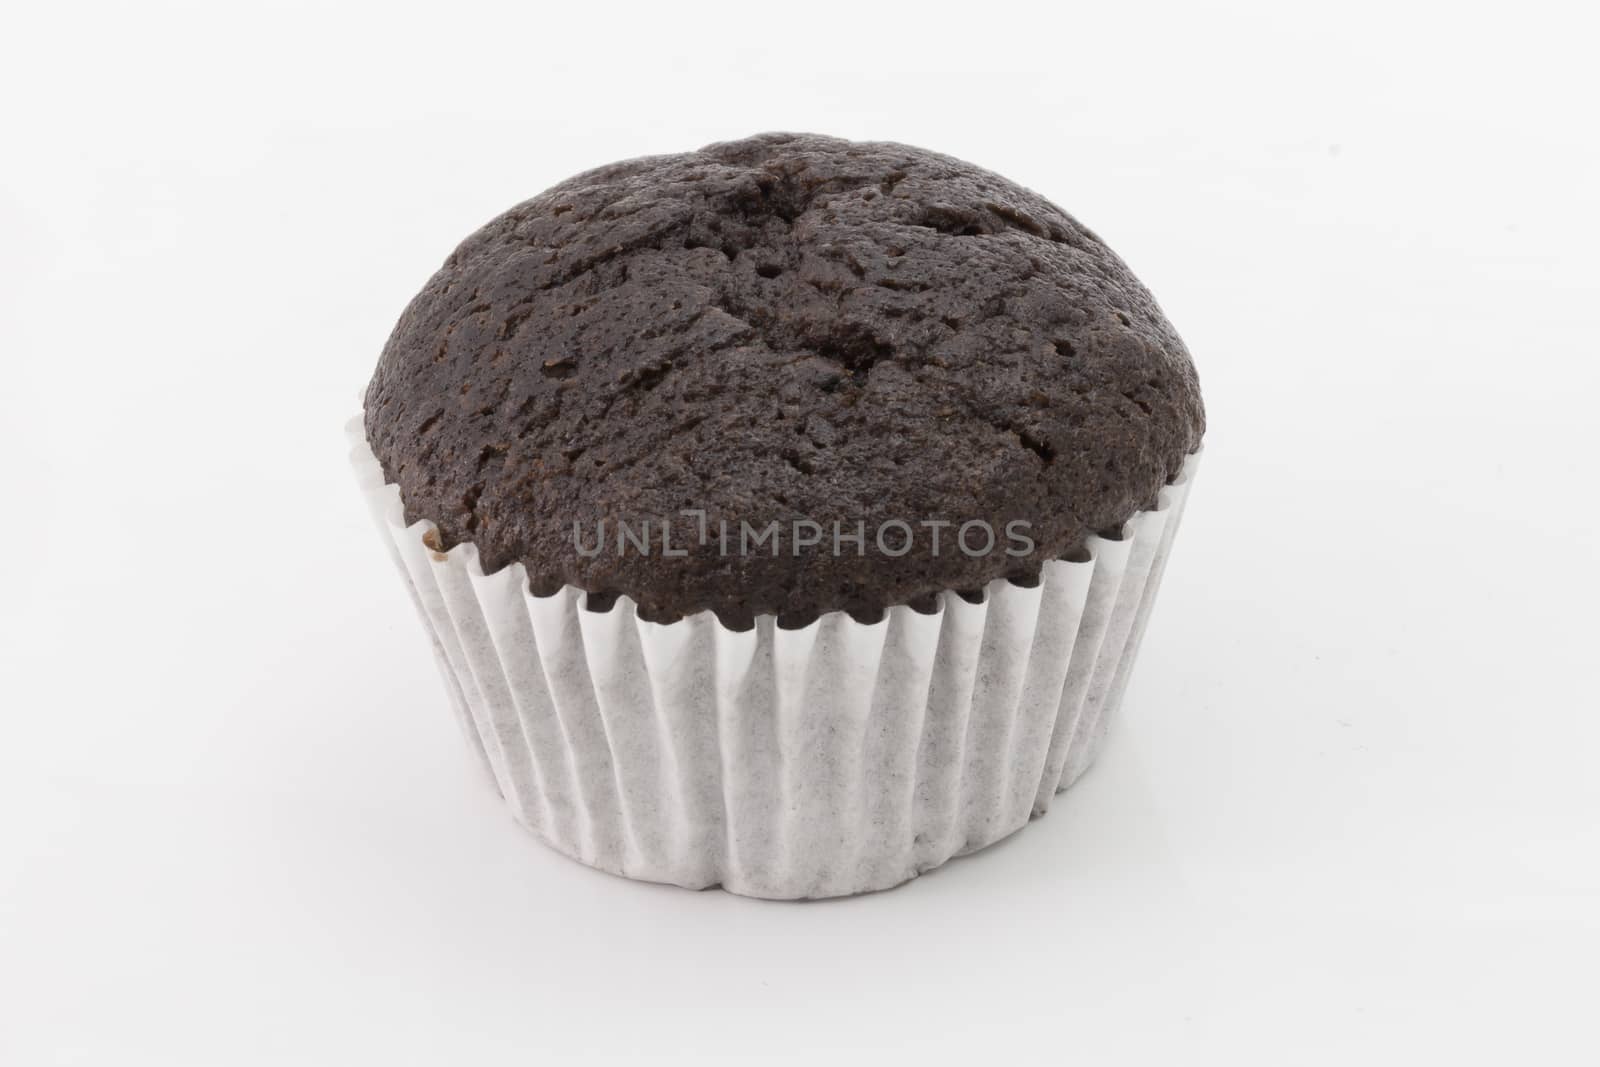 banana cup cake, chocolate cup cake isolated on white